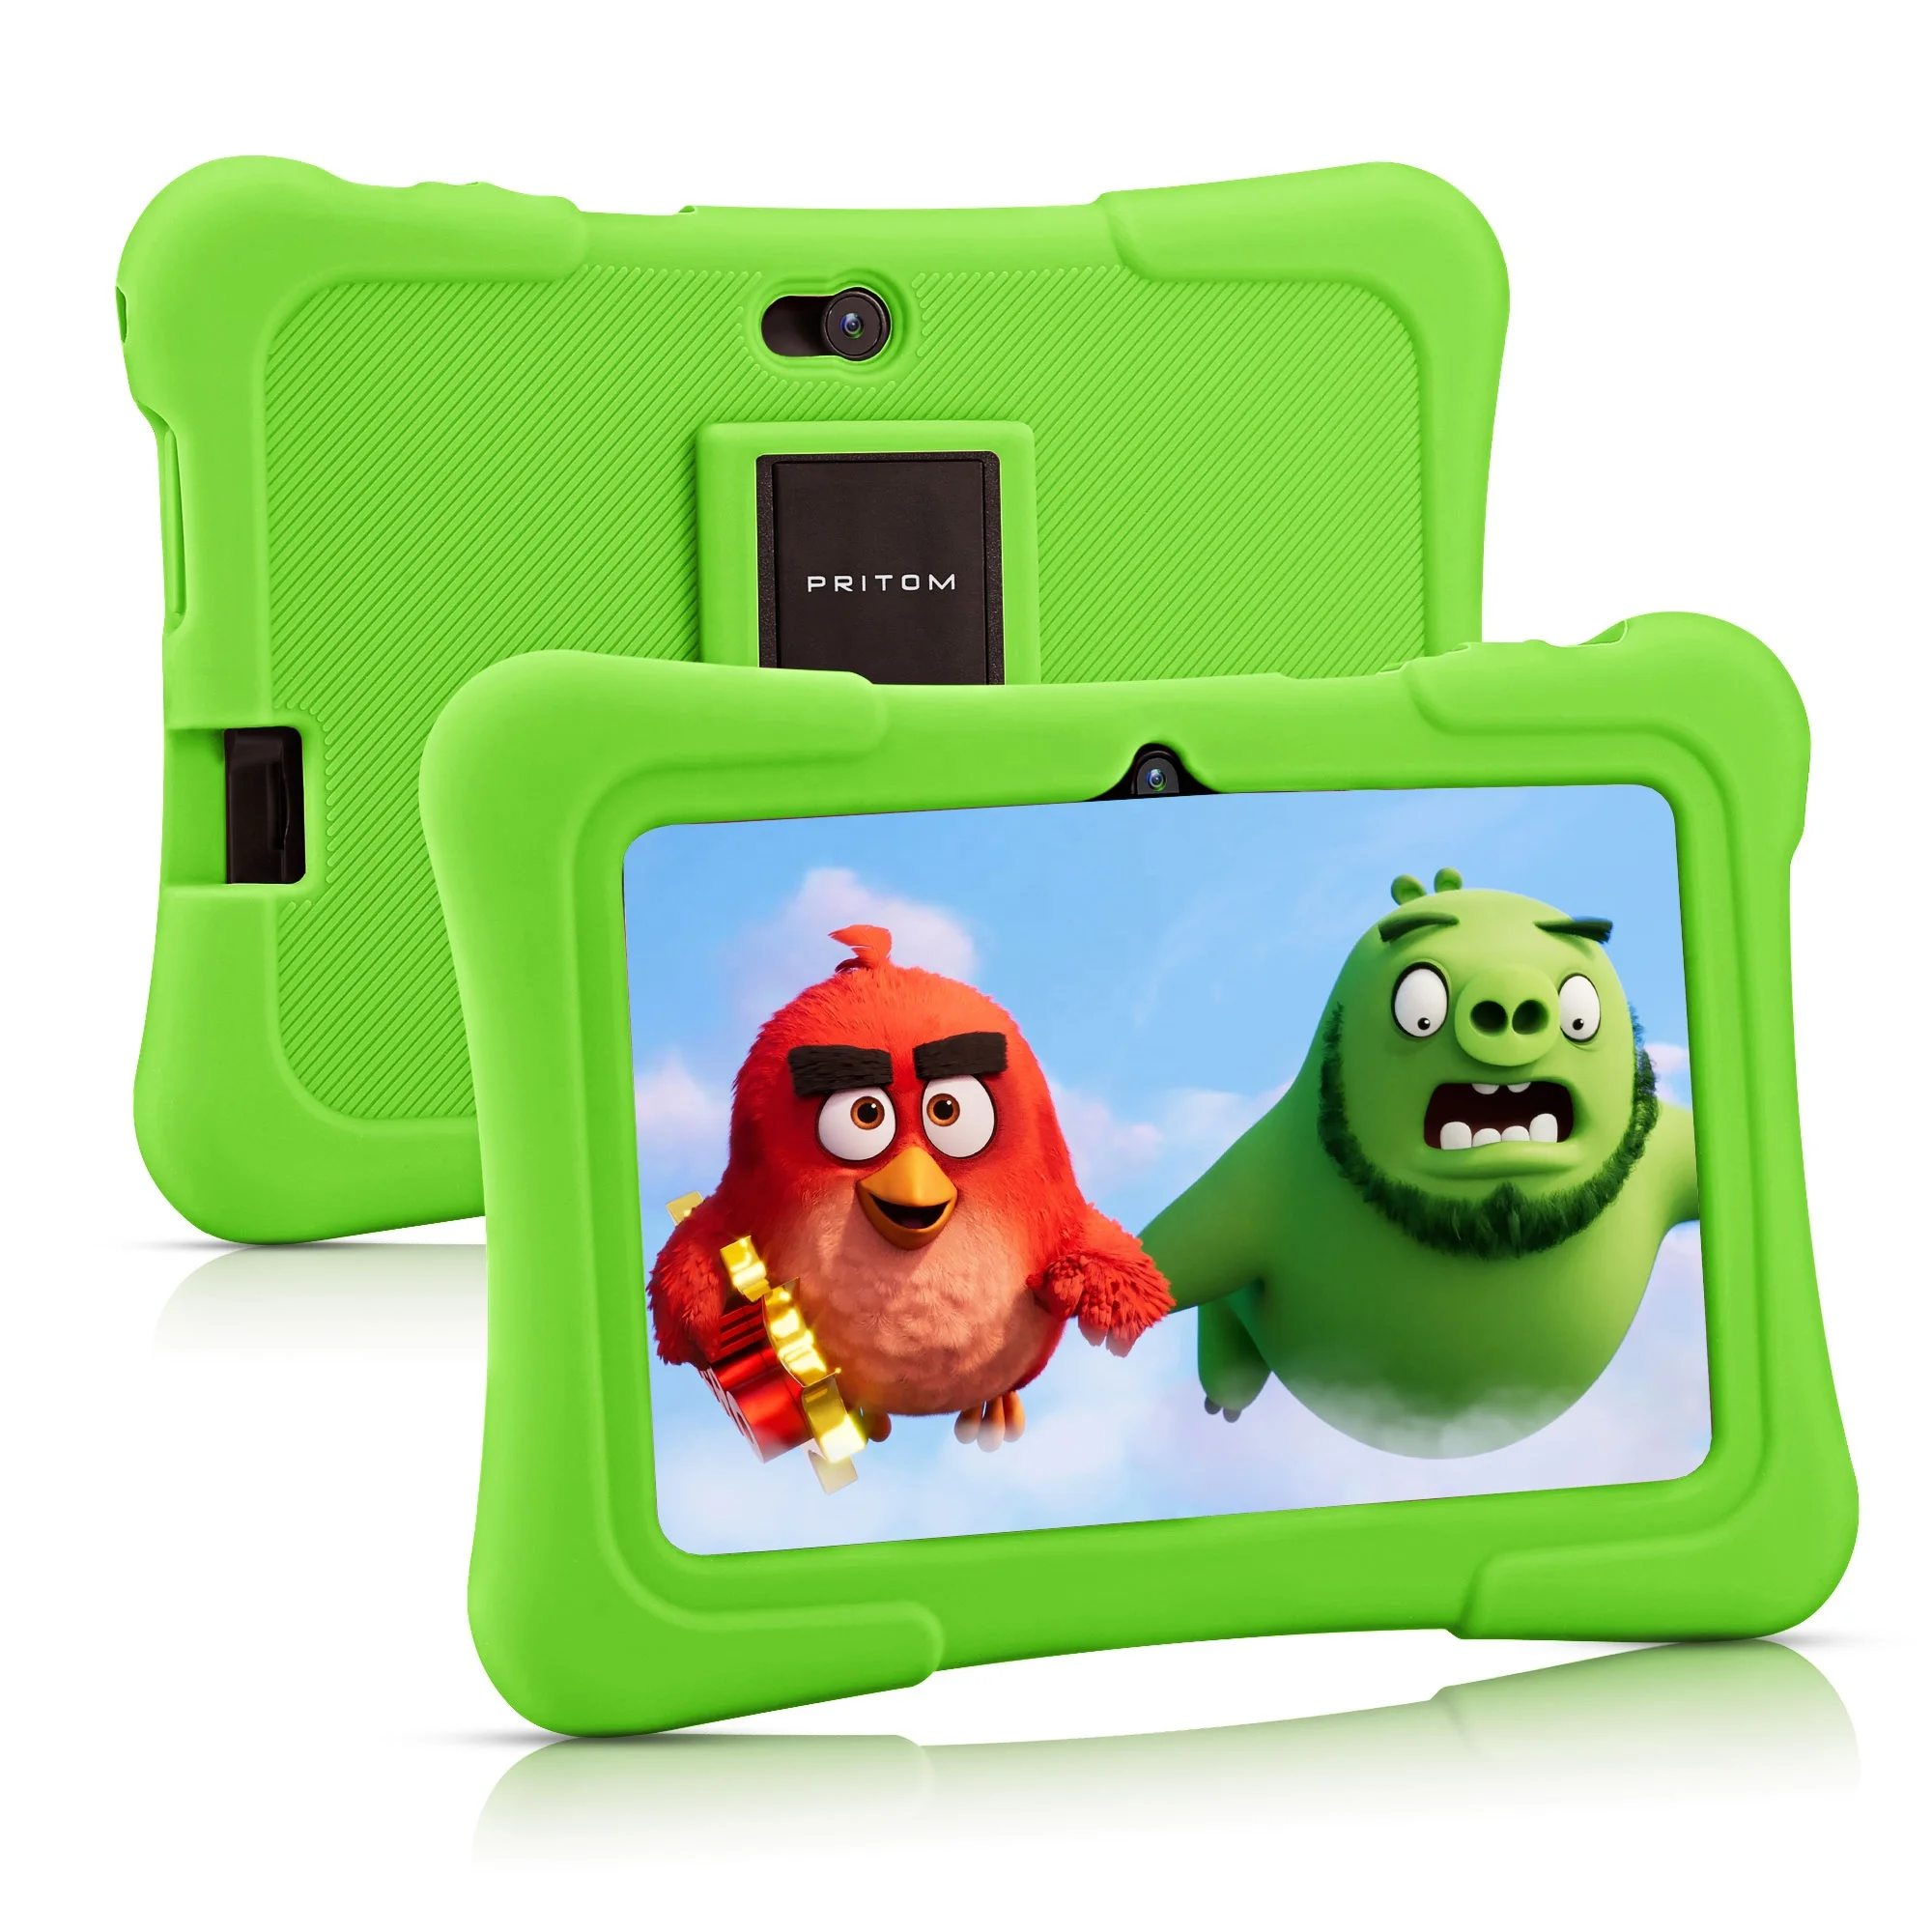 

PRITOM K7 PRO 7" tablet 2GB+16GB 0.3MP+2.0MP 3000mAh A50 Quad Core 1.5Ghz 7 inch android kids tablet pc for education